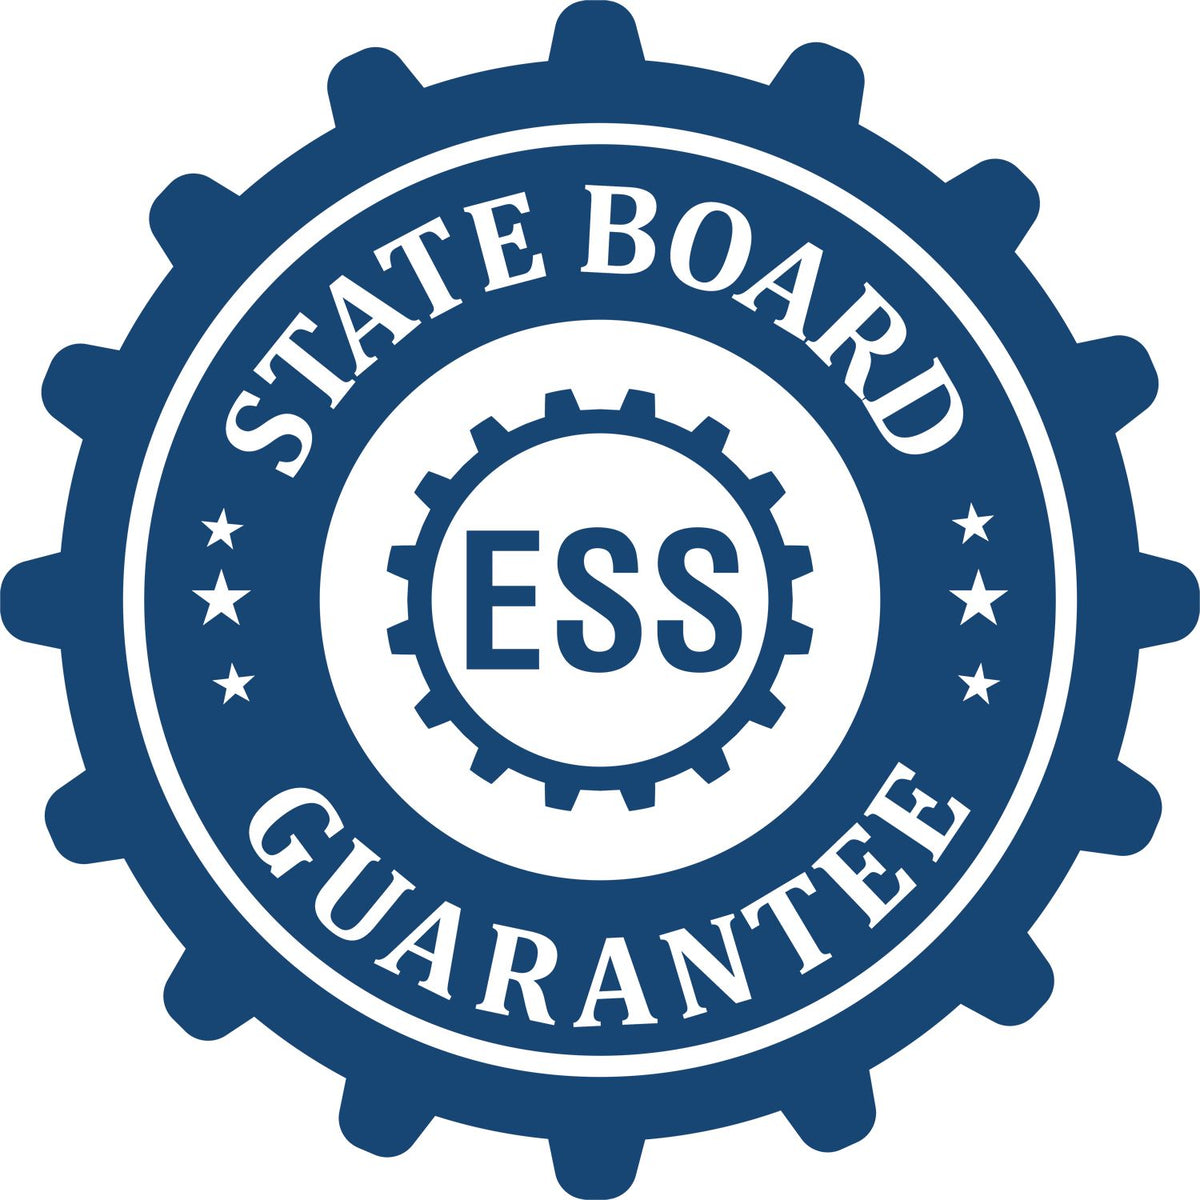 An emblem in a gear shape illustrating a state board guarantee for the Gift Maine Landscape Architect Seal